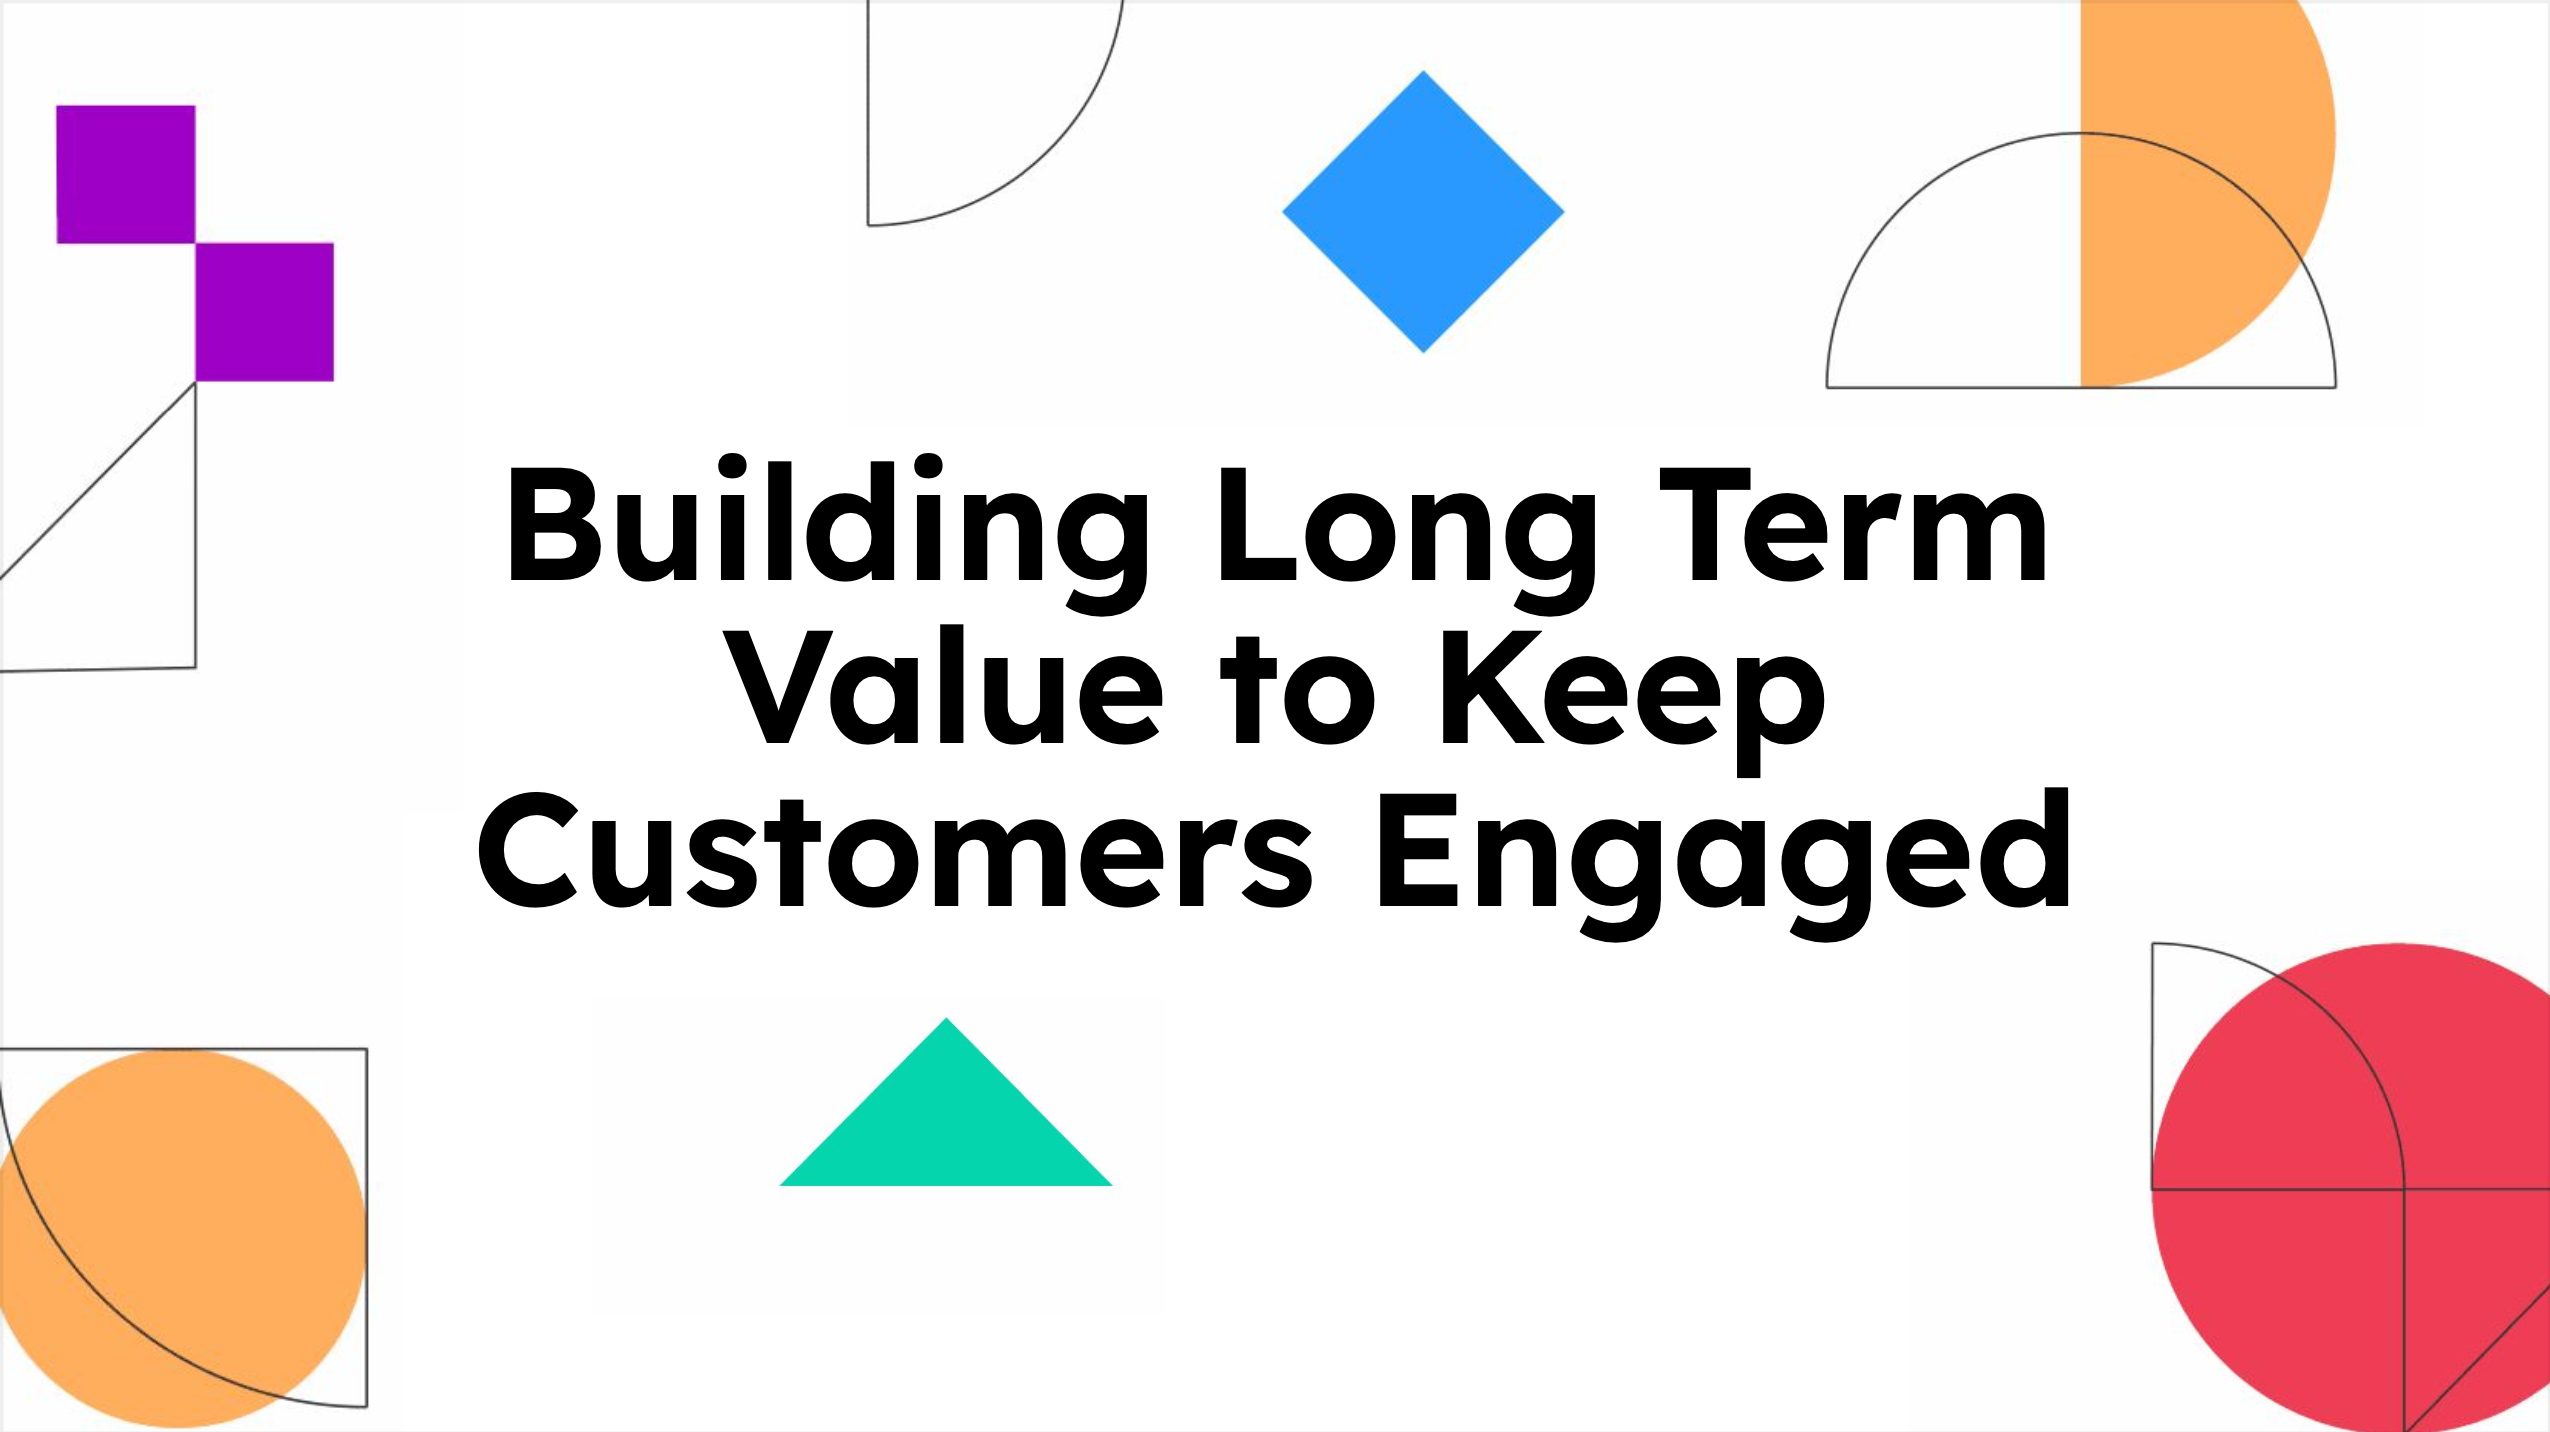 Building Long Term Value to Keep Customers Engaged